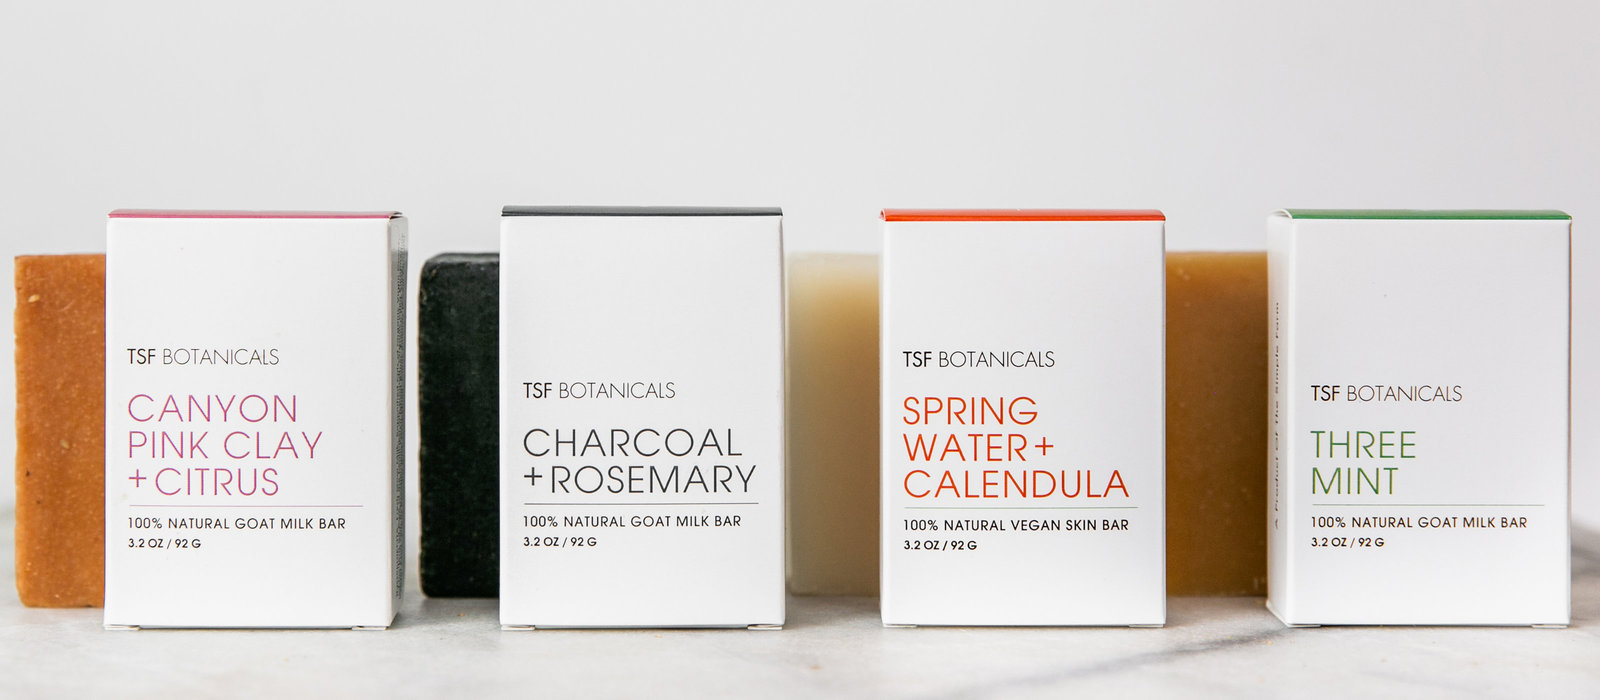 Karlie Colleen Photography - TSF Botanicals - Clean Natural Beauty Skincare Products-114-crop